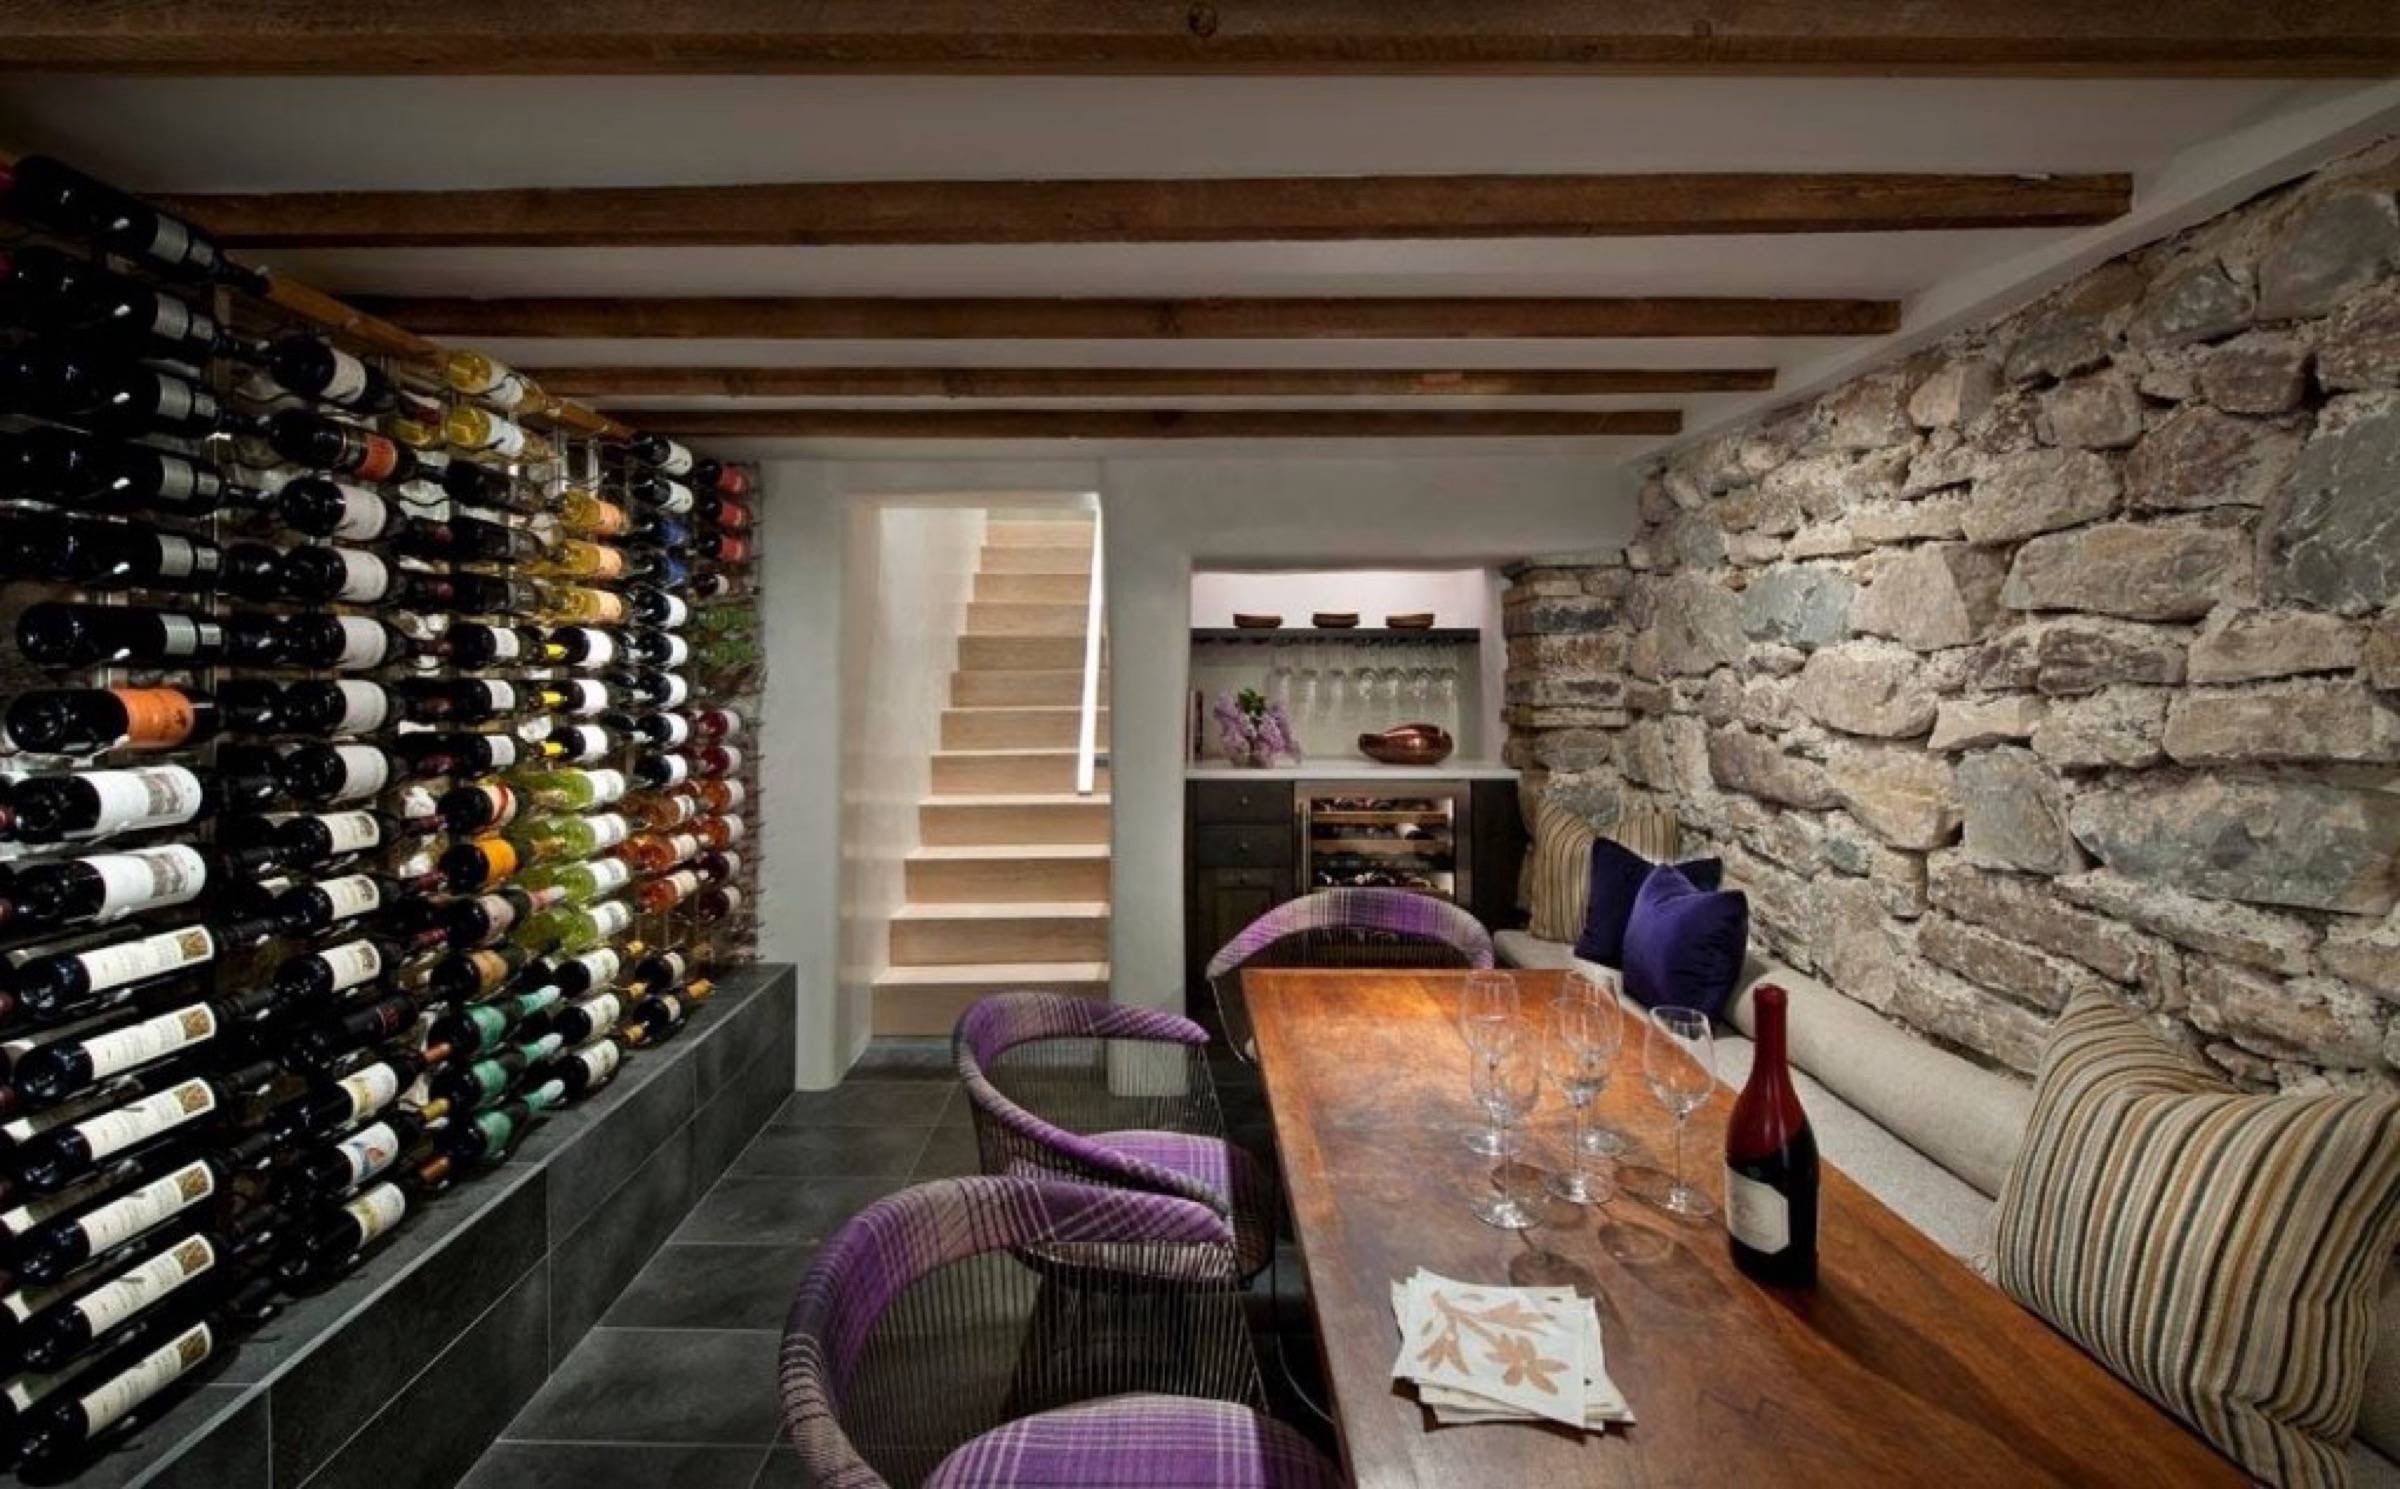 Stylish basement wine cellar with private staircase access, wine racks, seating area, and mini-fridge